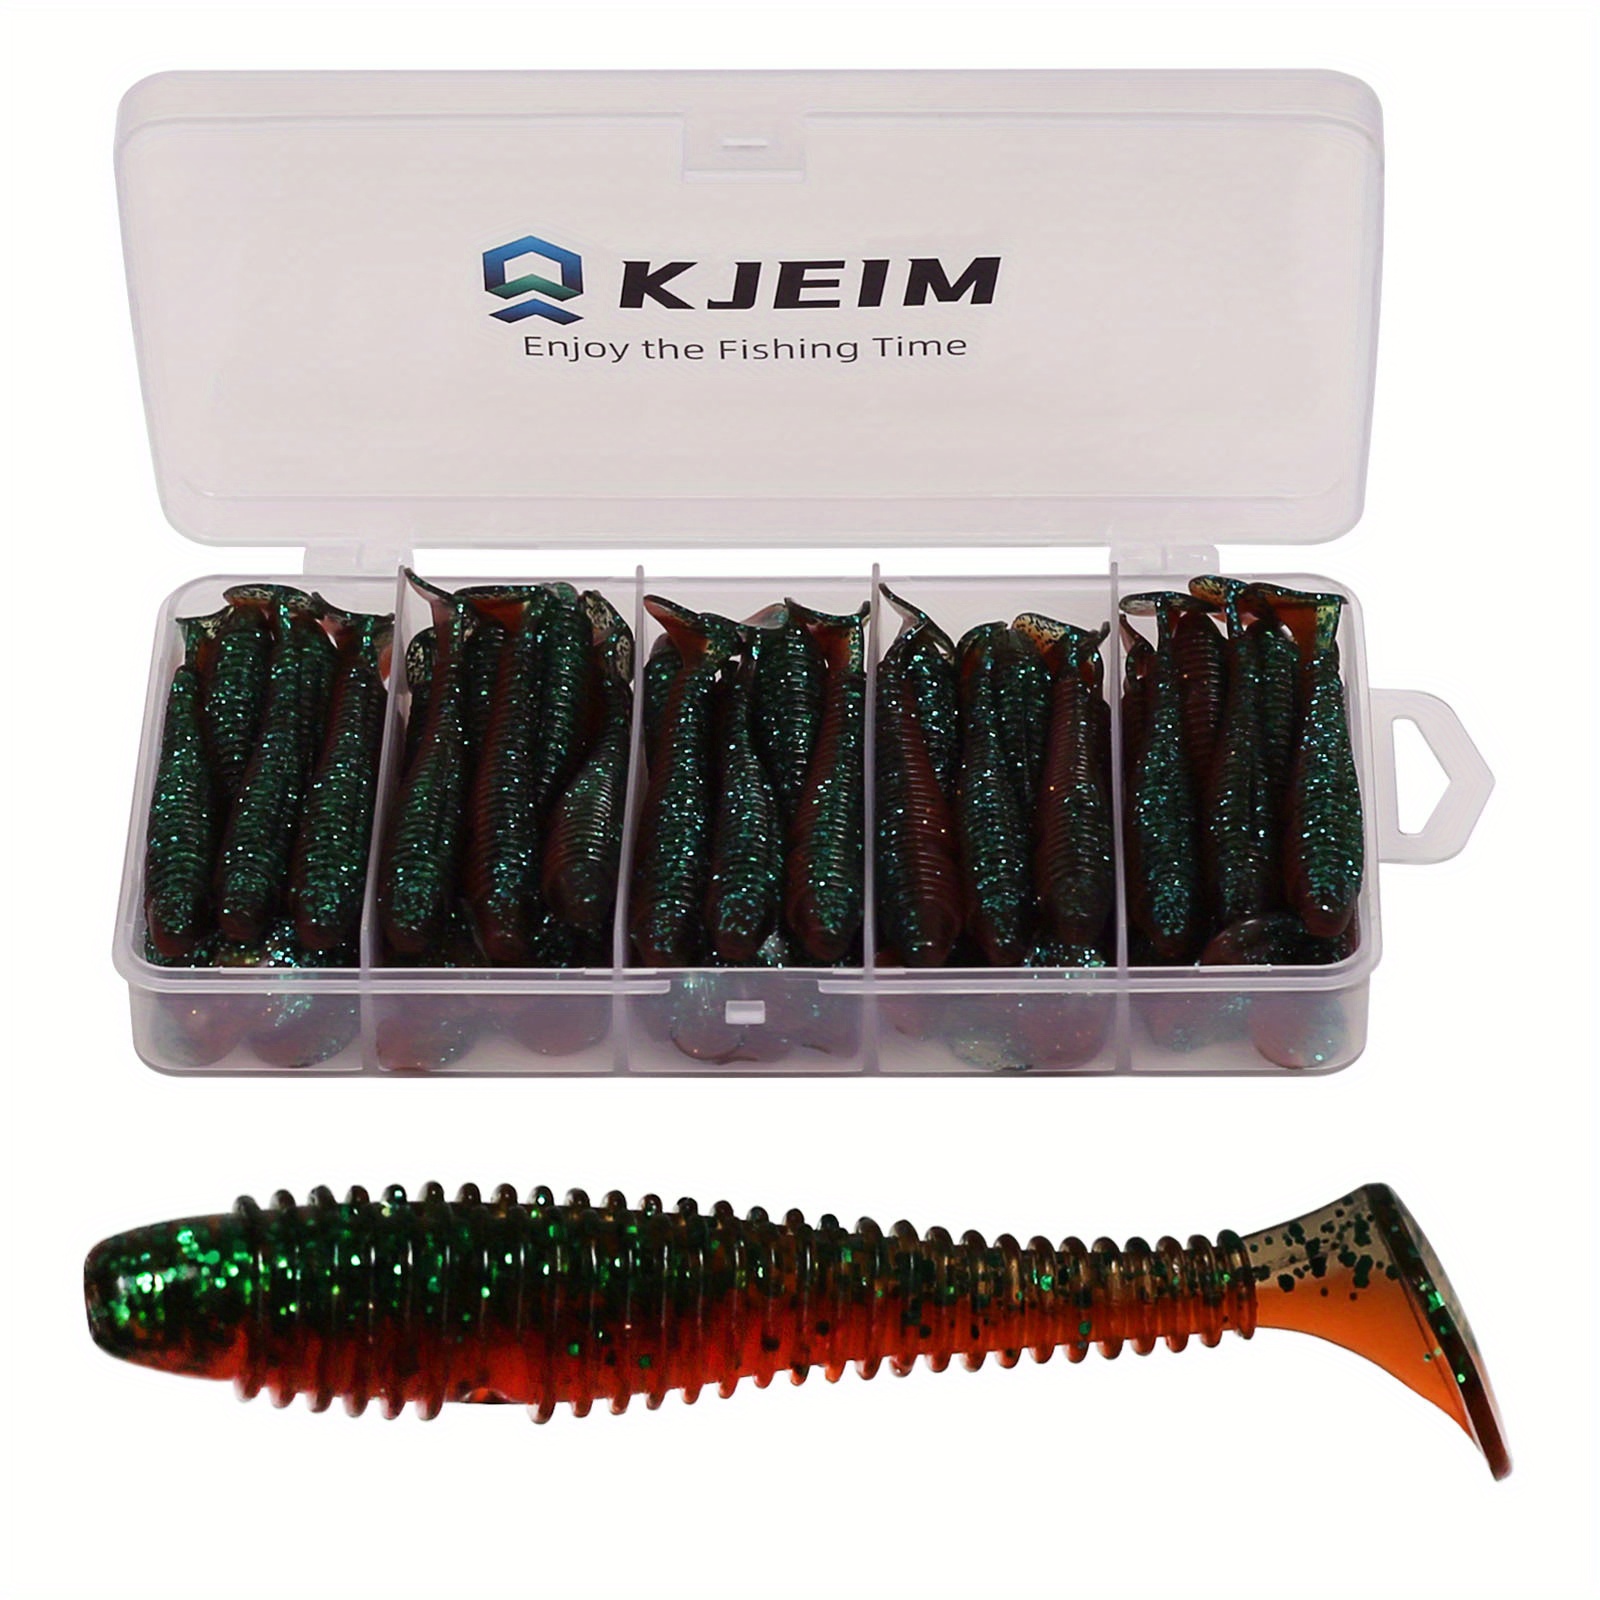 KJEIM 50PCS Paddle Tail Swimbaits, Soft Plastic Fishing Lures For Bass  Trout Crappie Walleye, Saltwater/Freshwater Fishing Lure